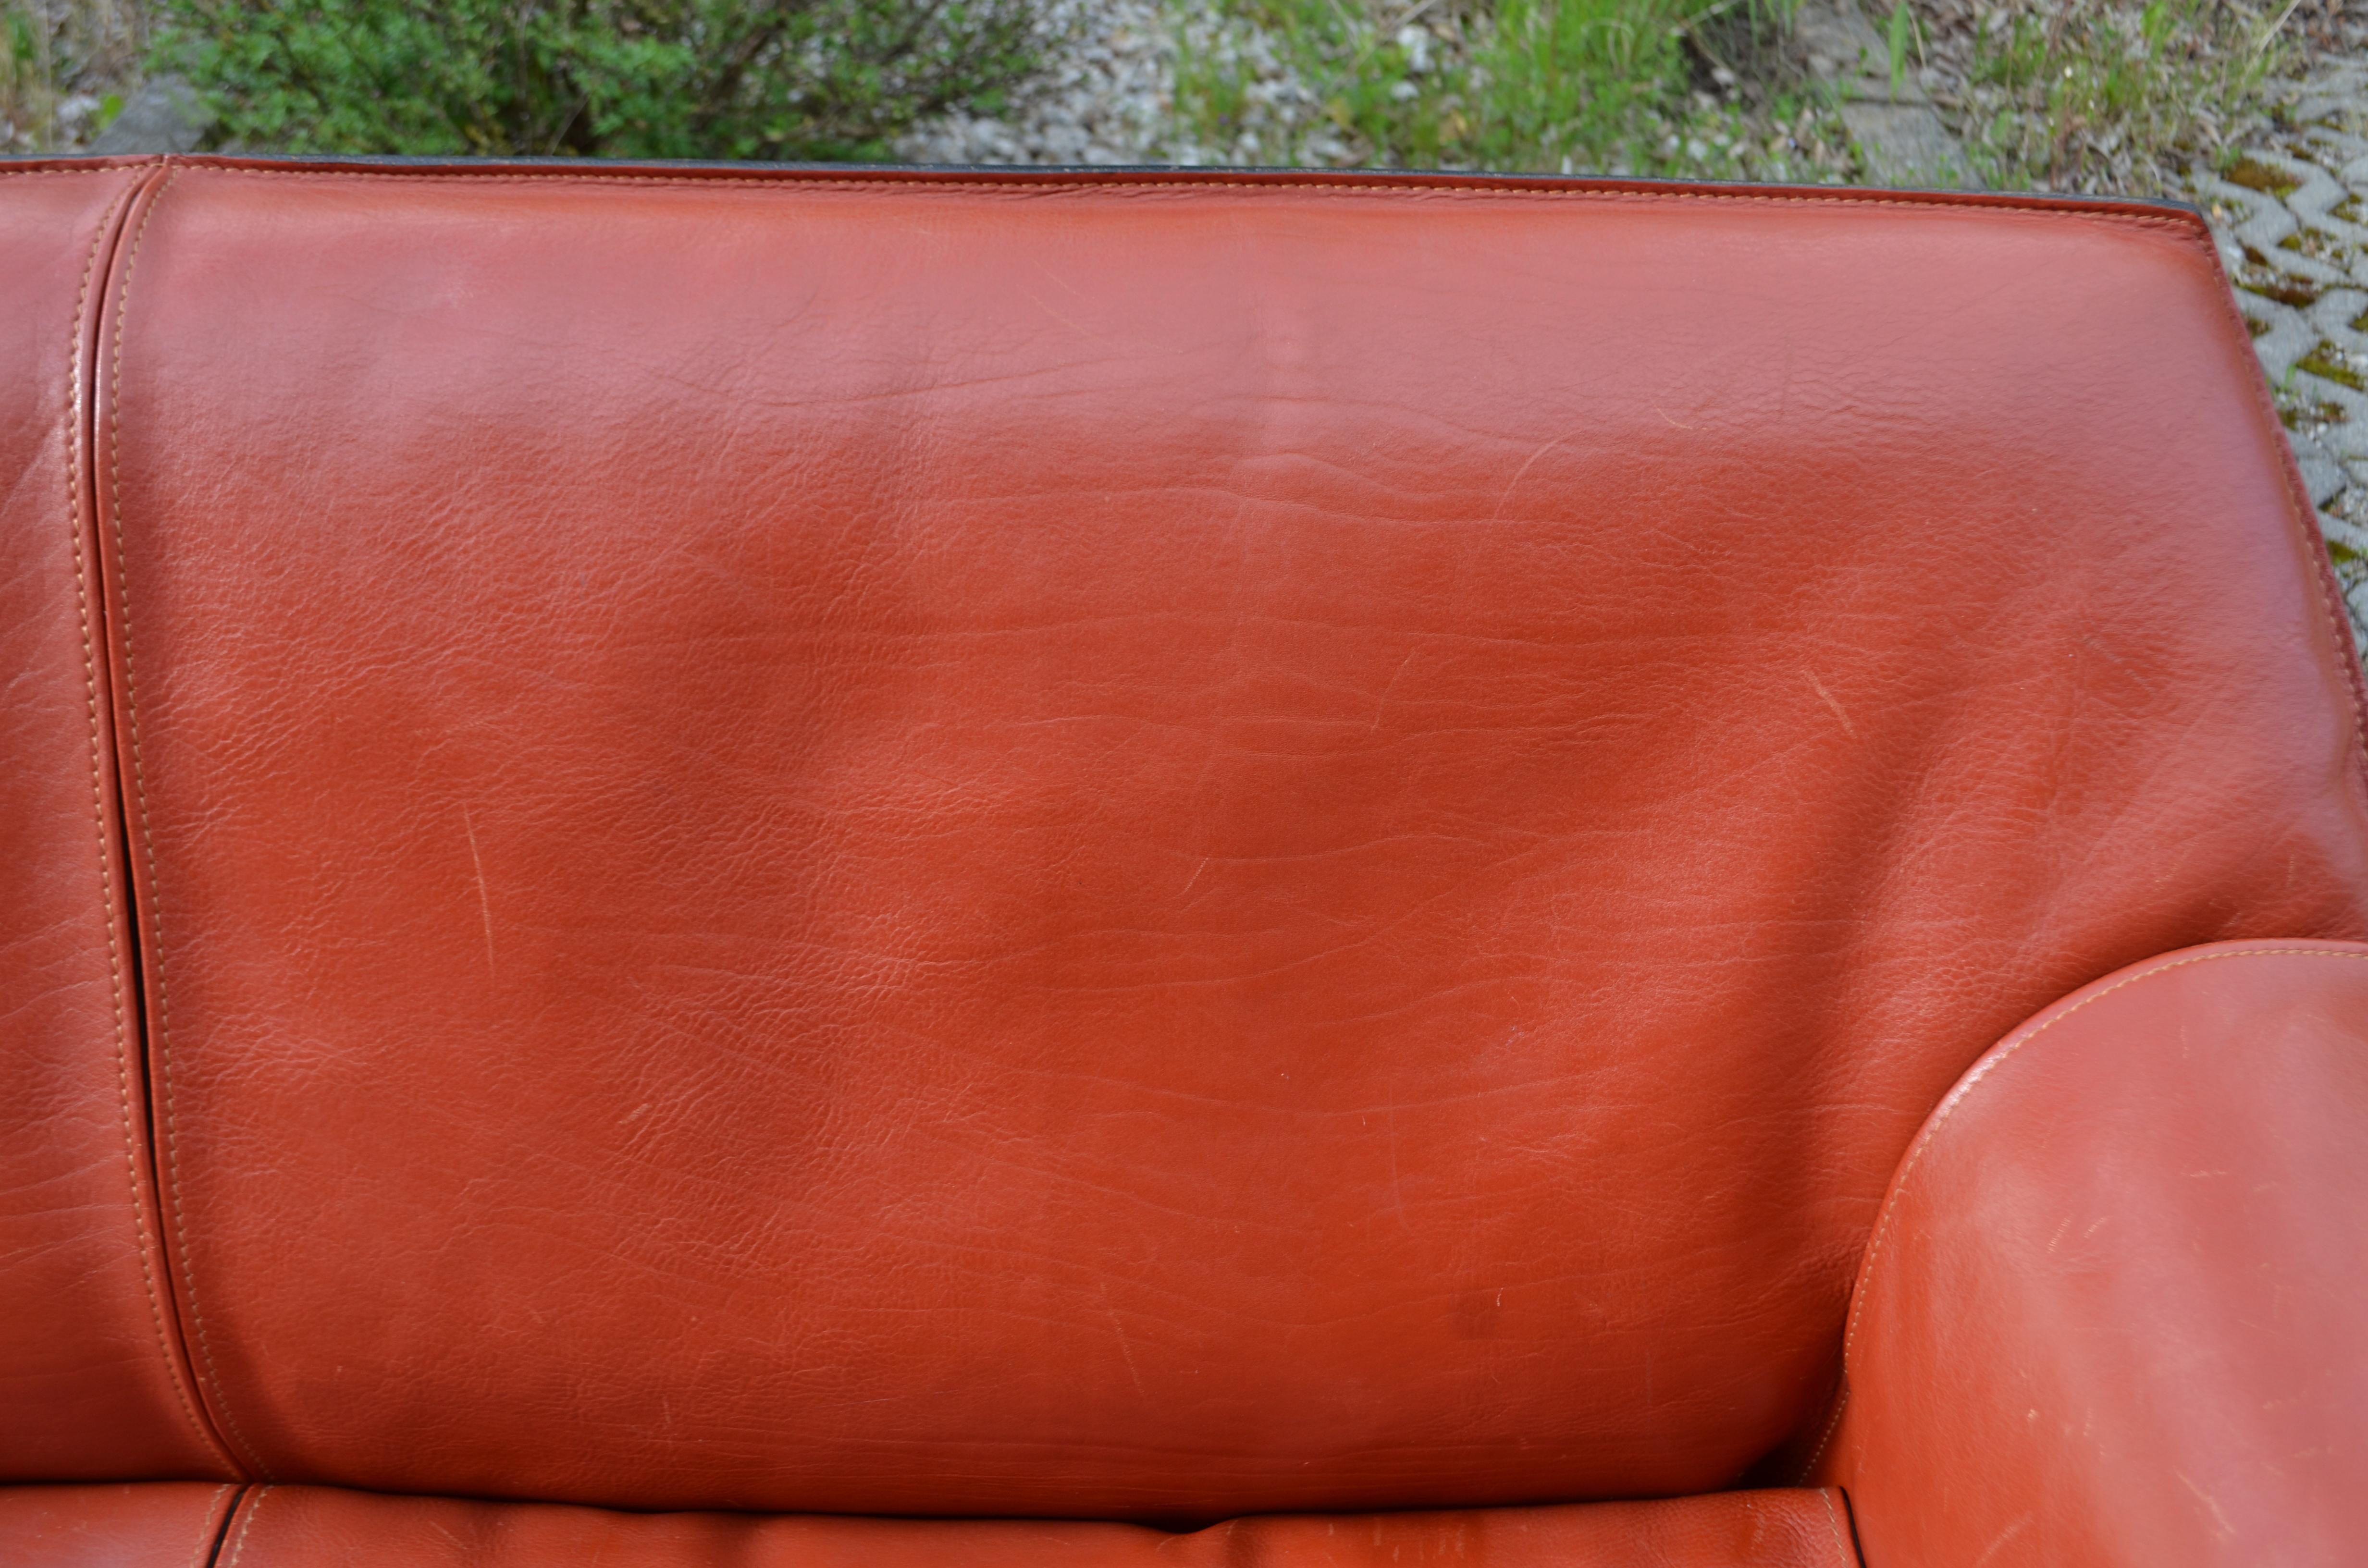 Cassina Cab 415 Neck Saddle Leather Sofa China Red / Ox Red For Sale 1